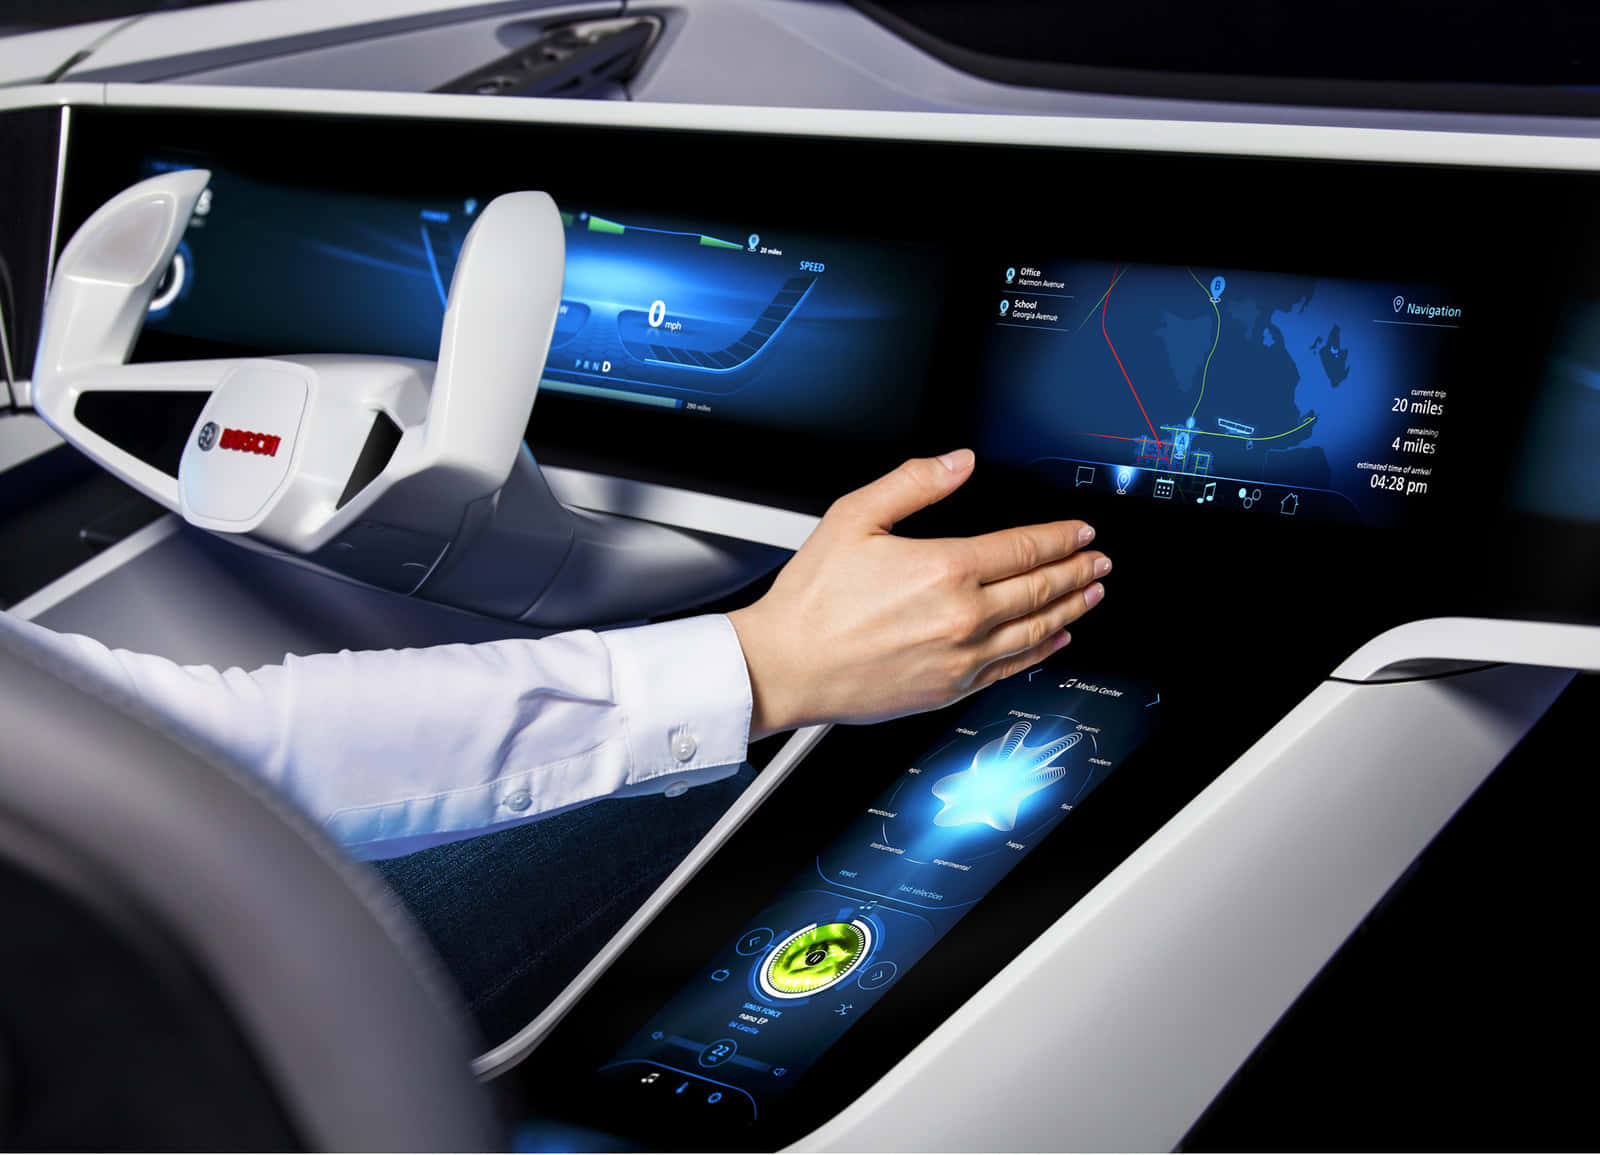 Futuristic Car Dashboard with Advanced Technology Features Wallpaper